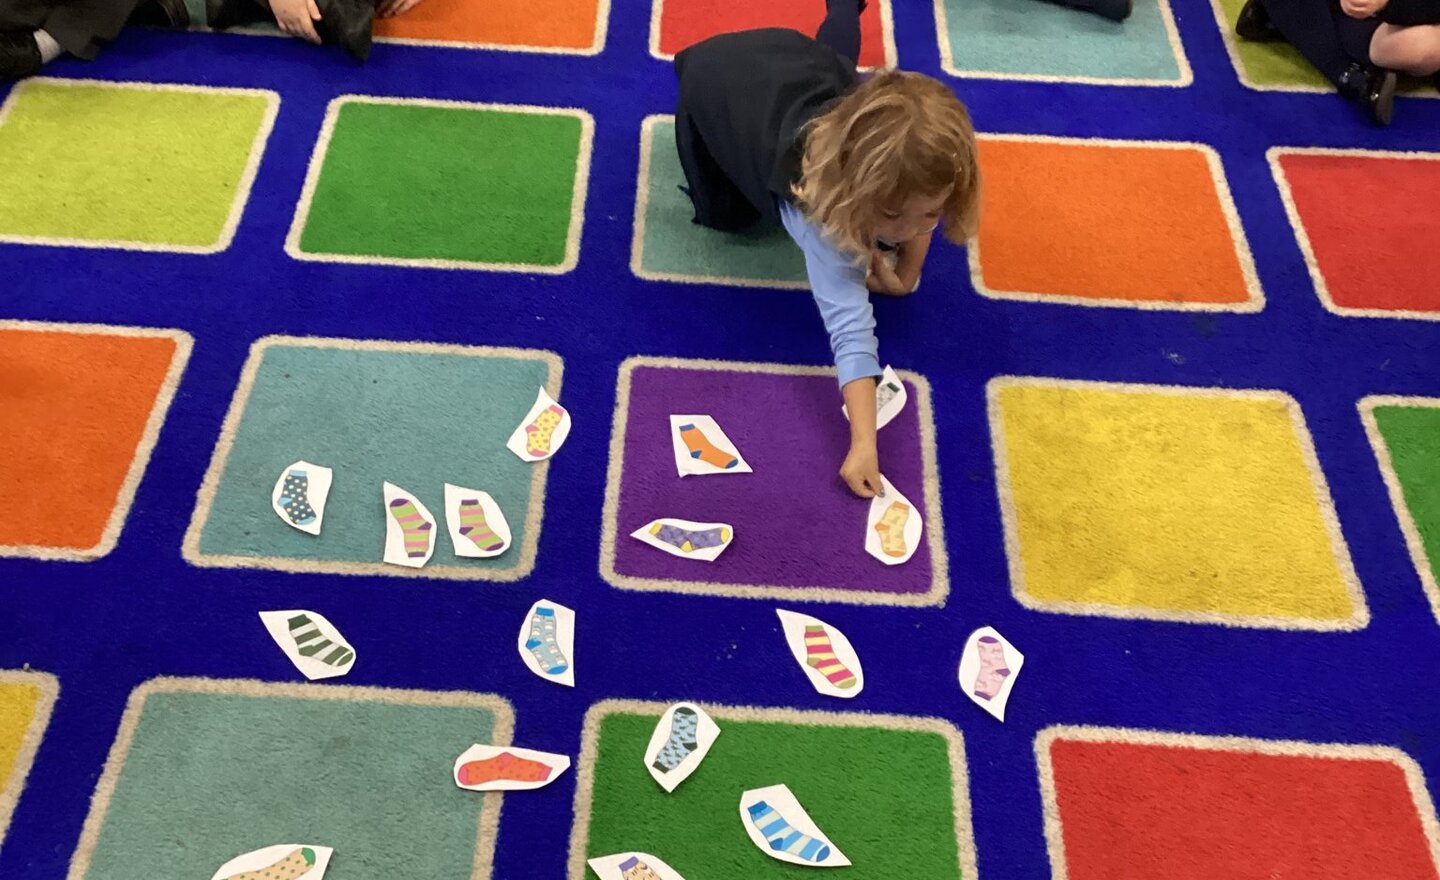 Image of Reception- Elmer & matching and sorting 